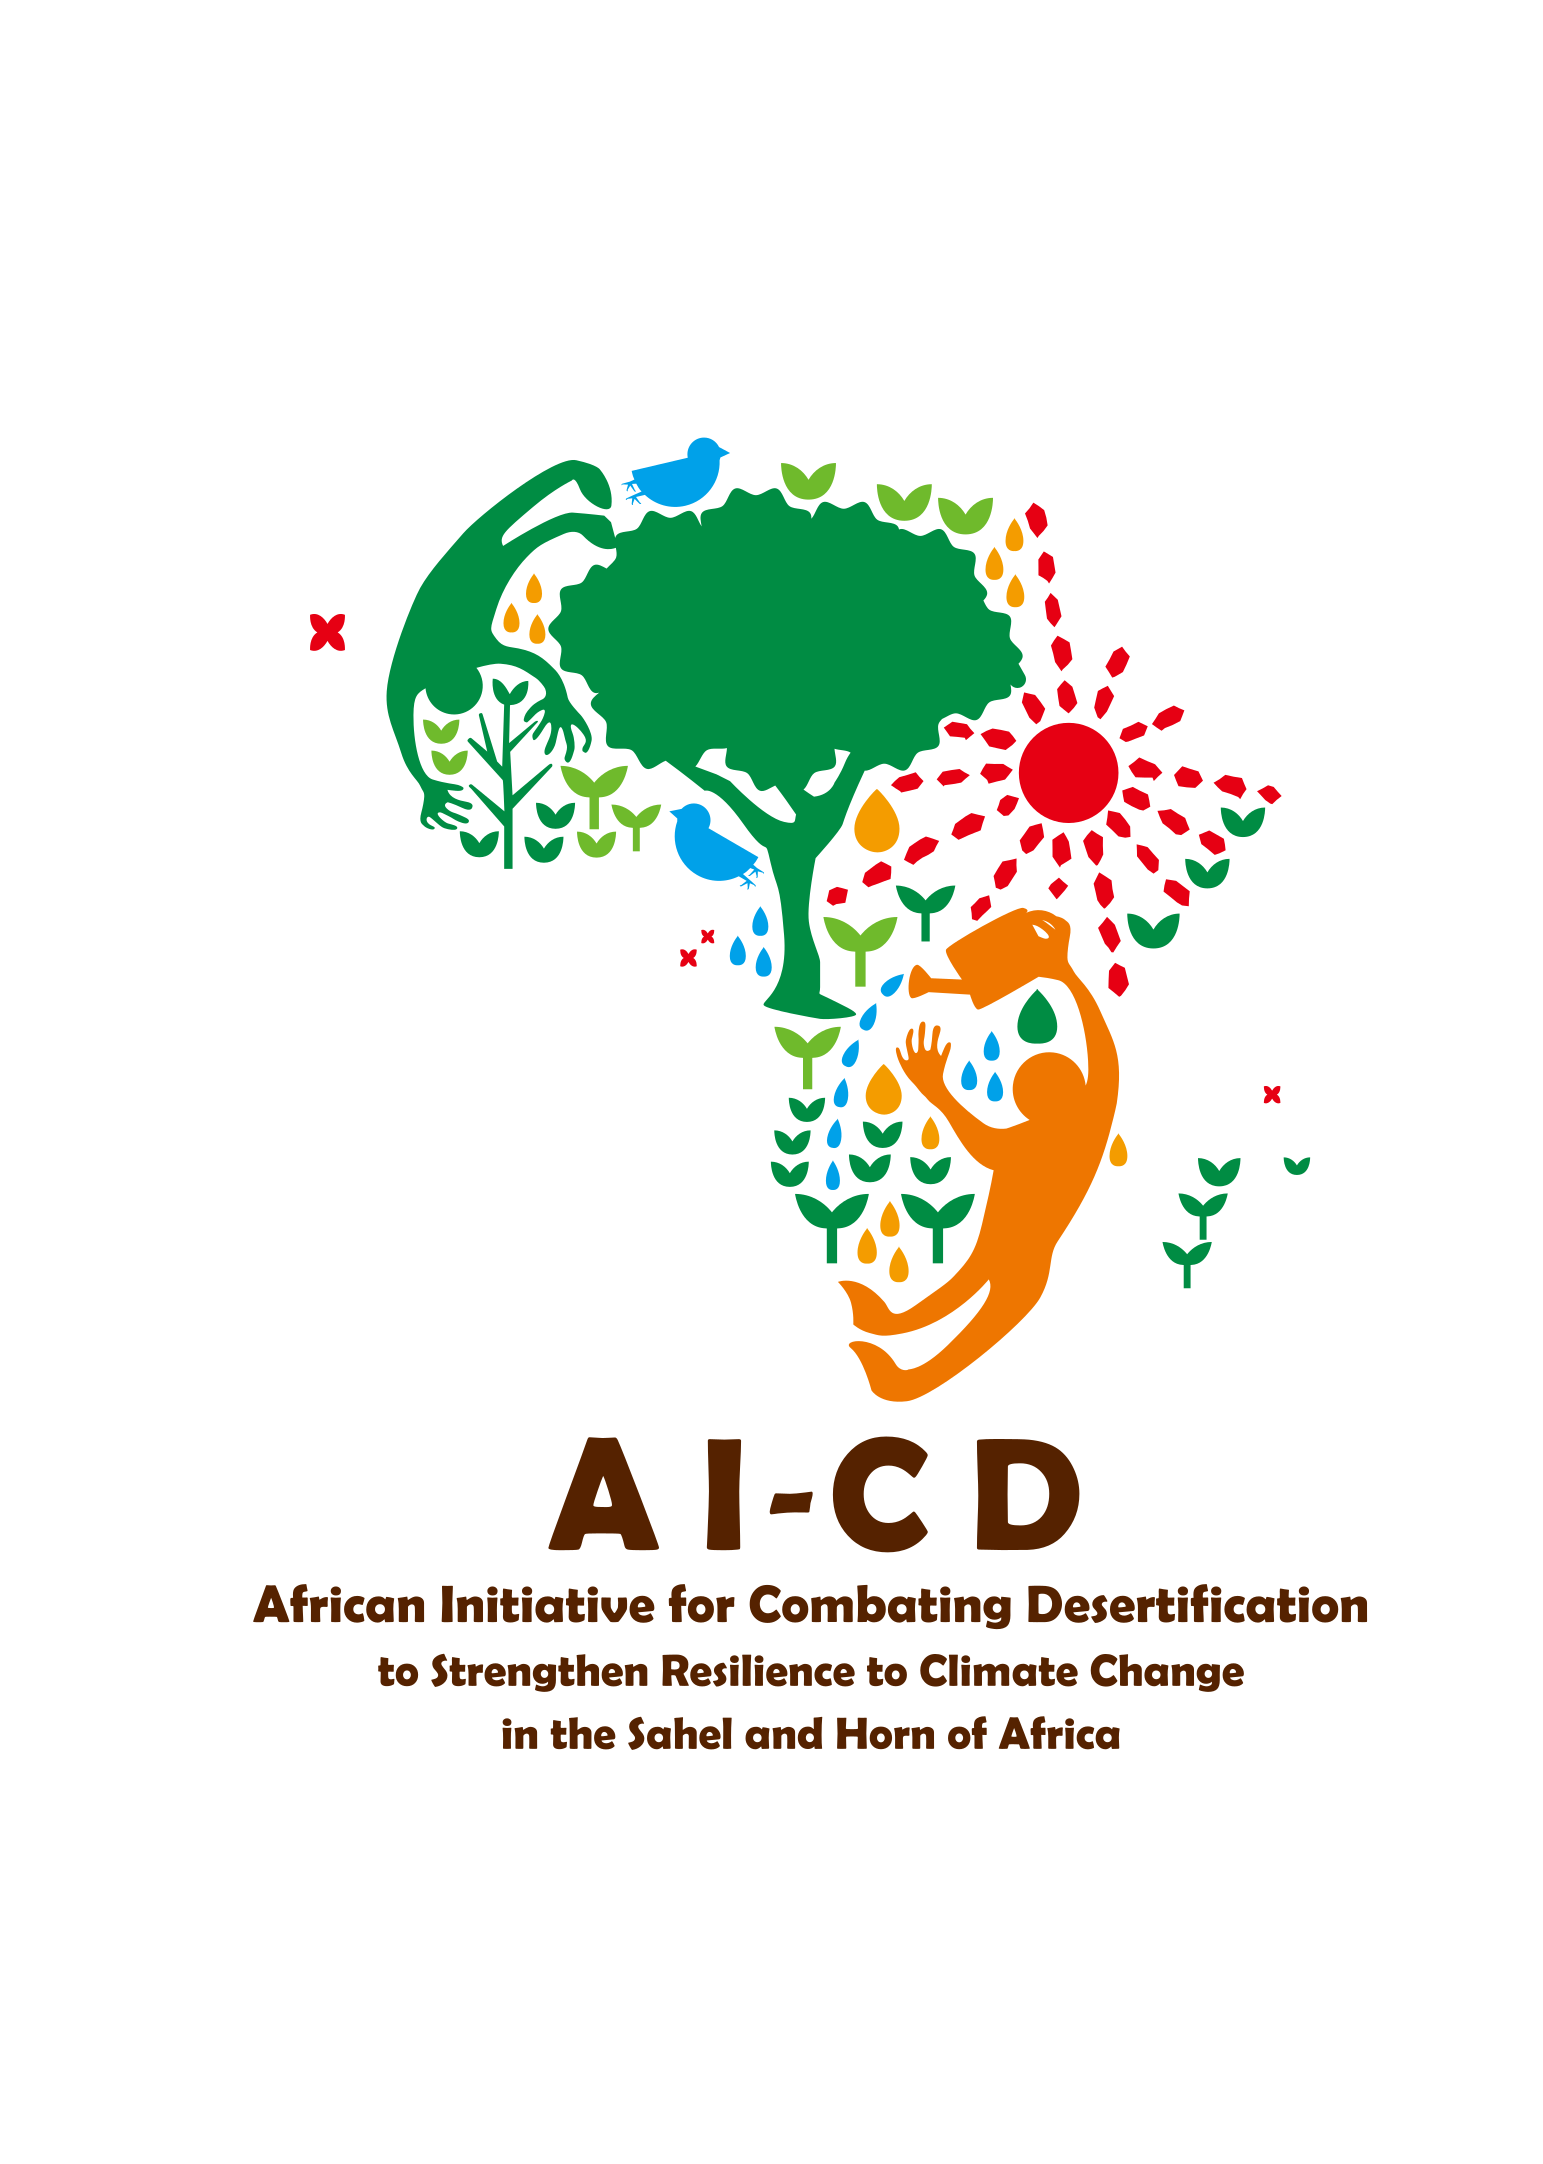 Image: logo of African Initiative for Combating Desertification (AI-CD)